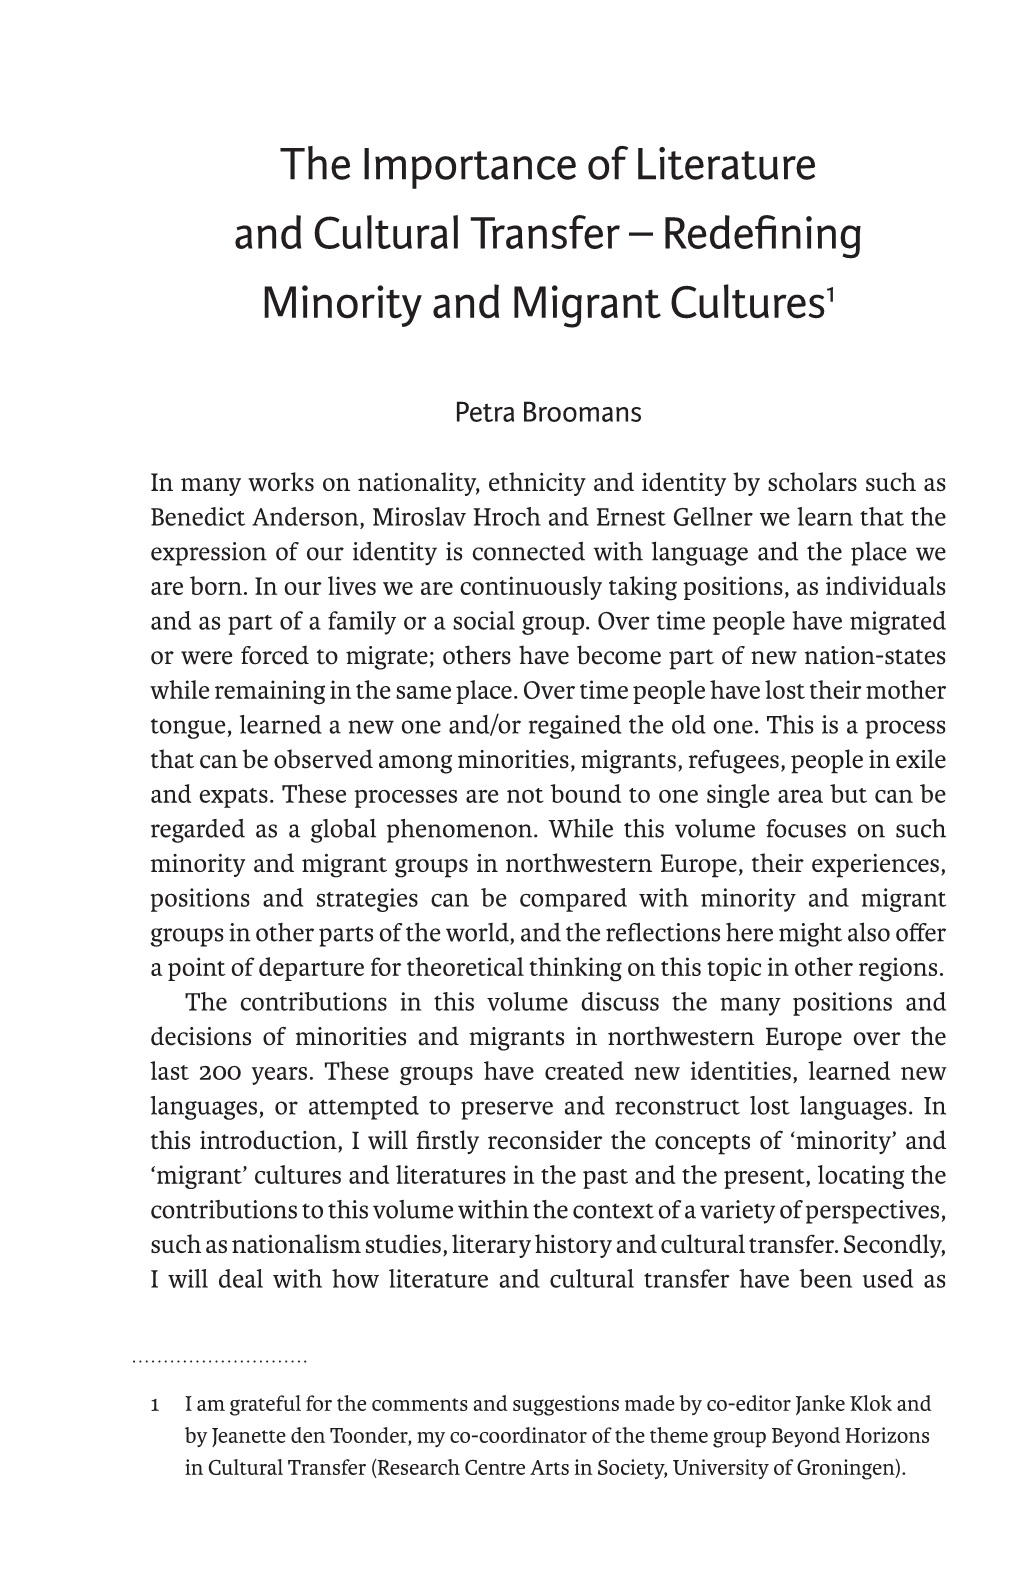 The Importance of Literature and Cultural Transfer – Redefining Minority and Migrant Cultures1